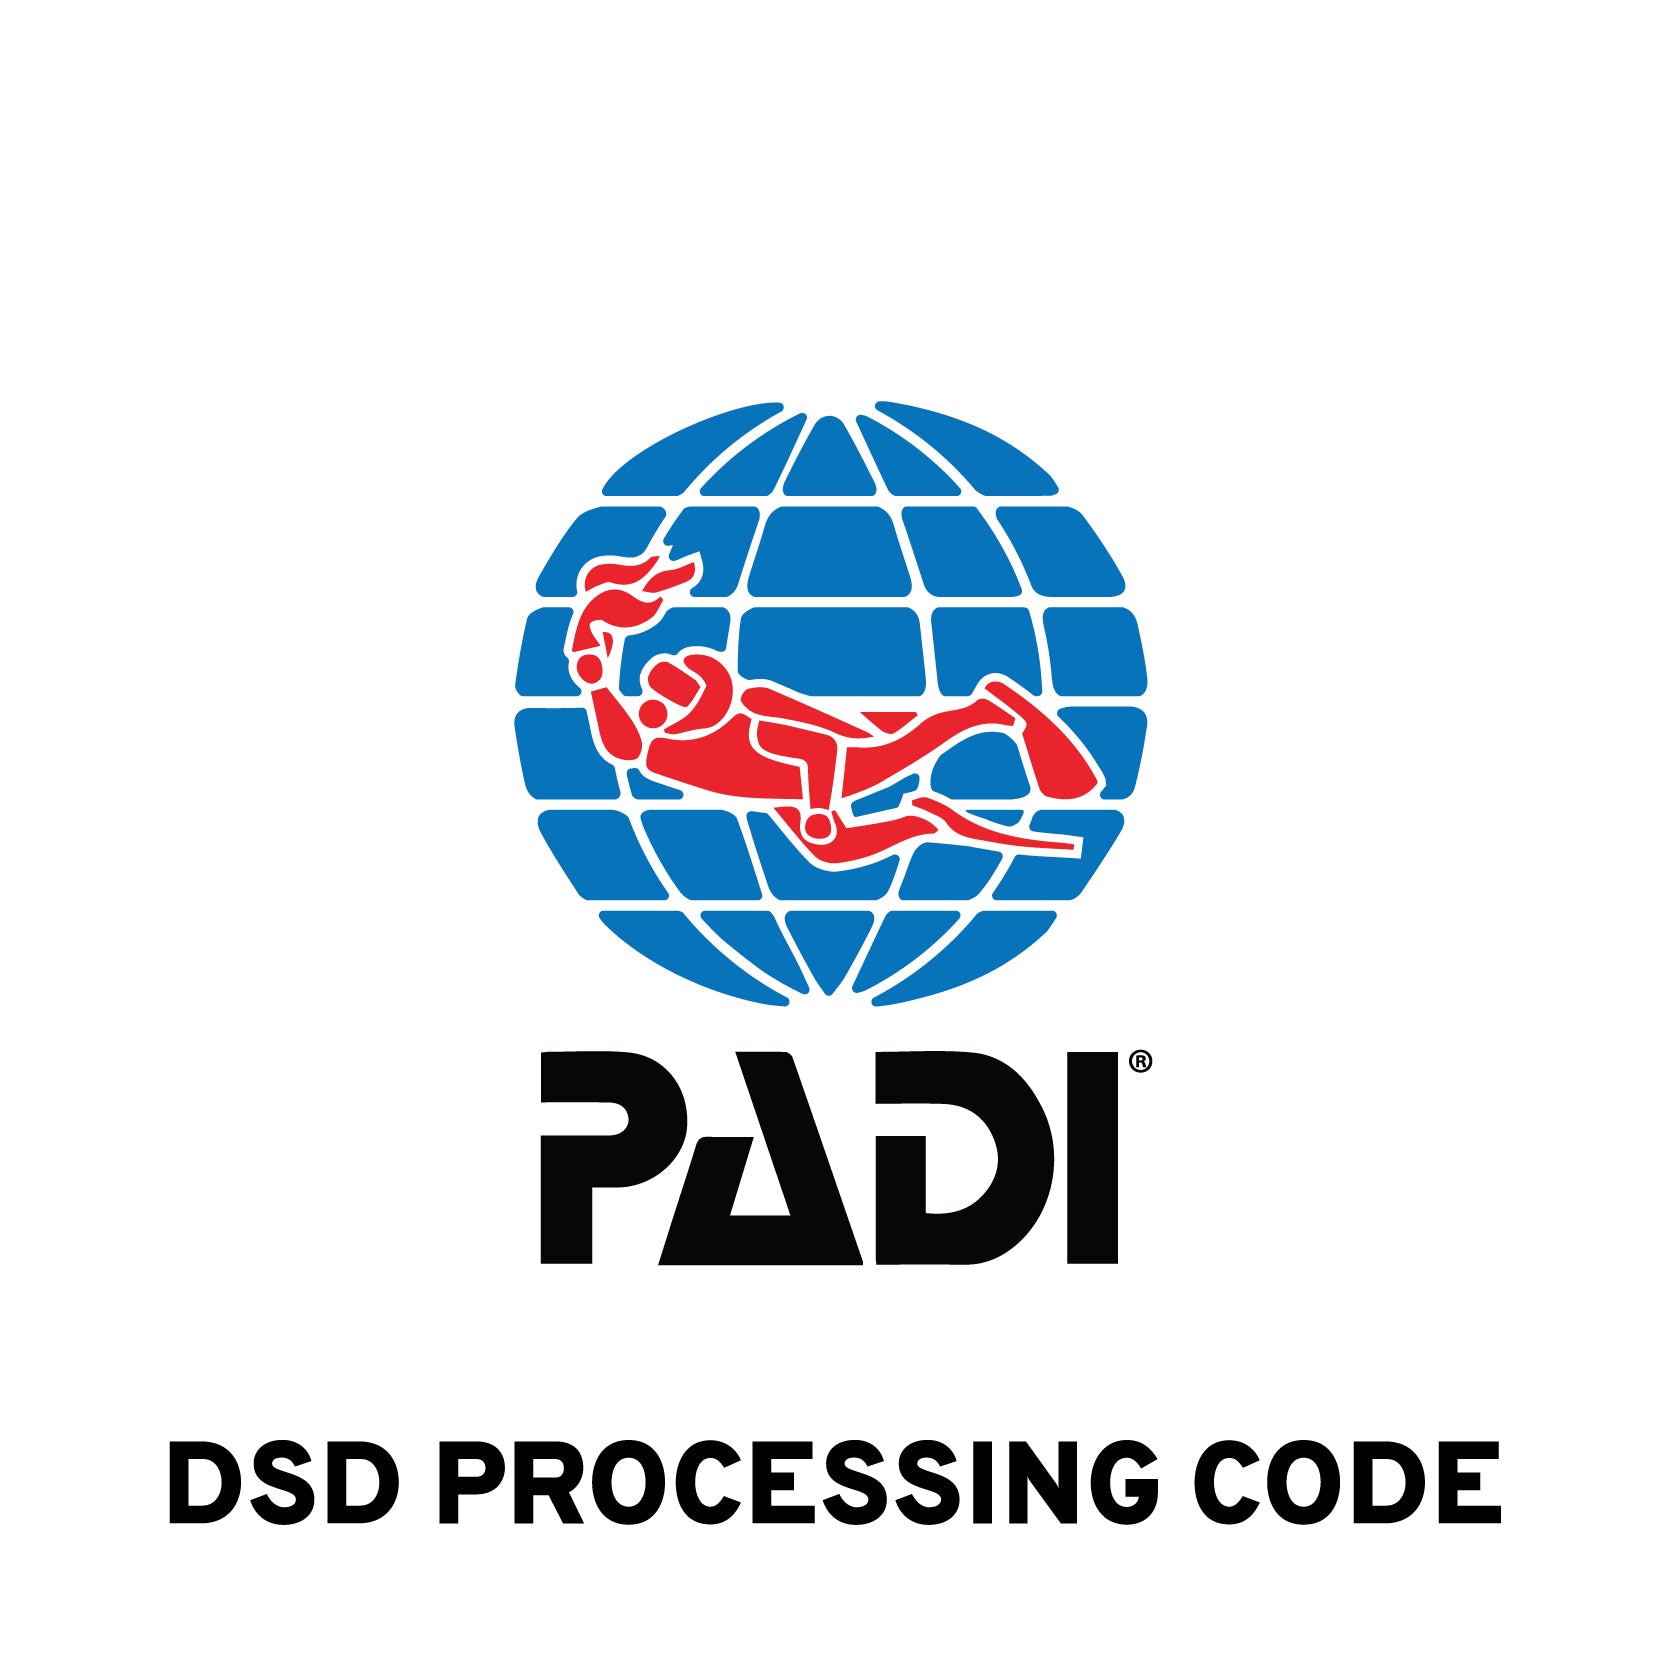 DSD PROCESSING CODE